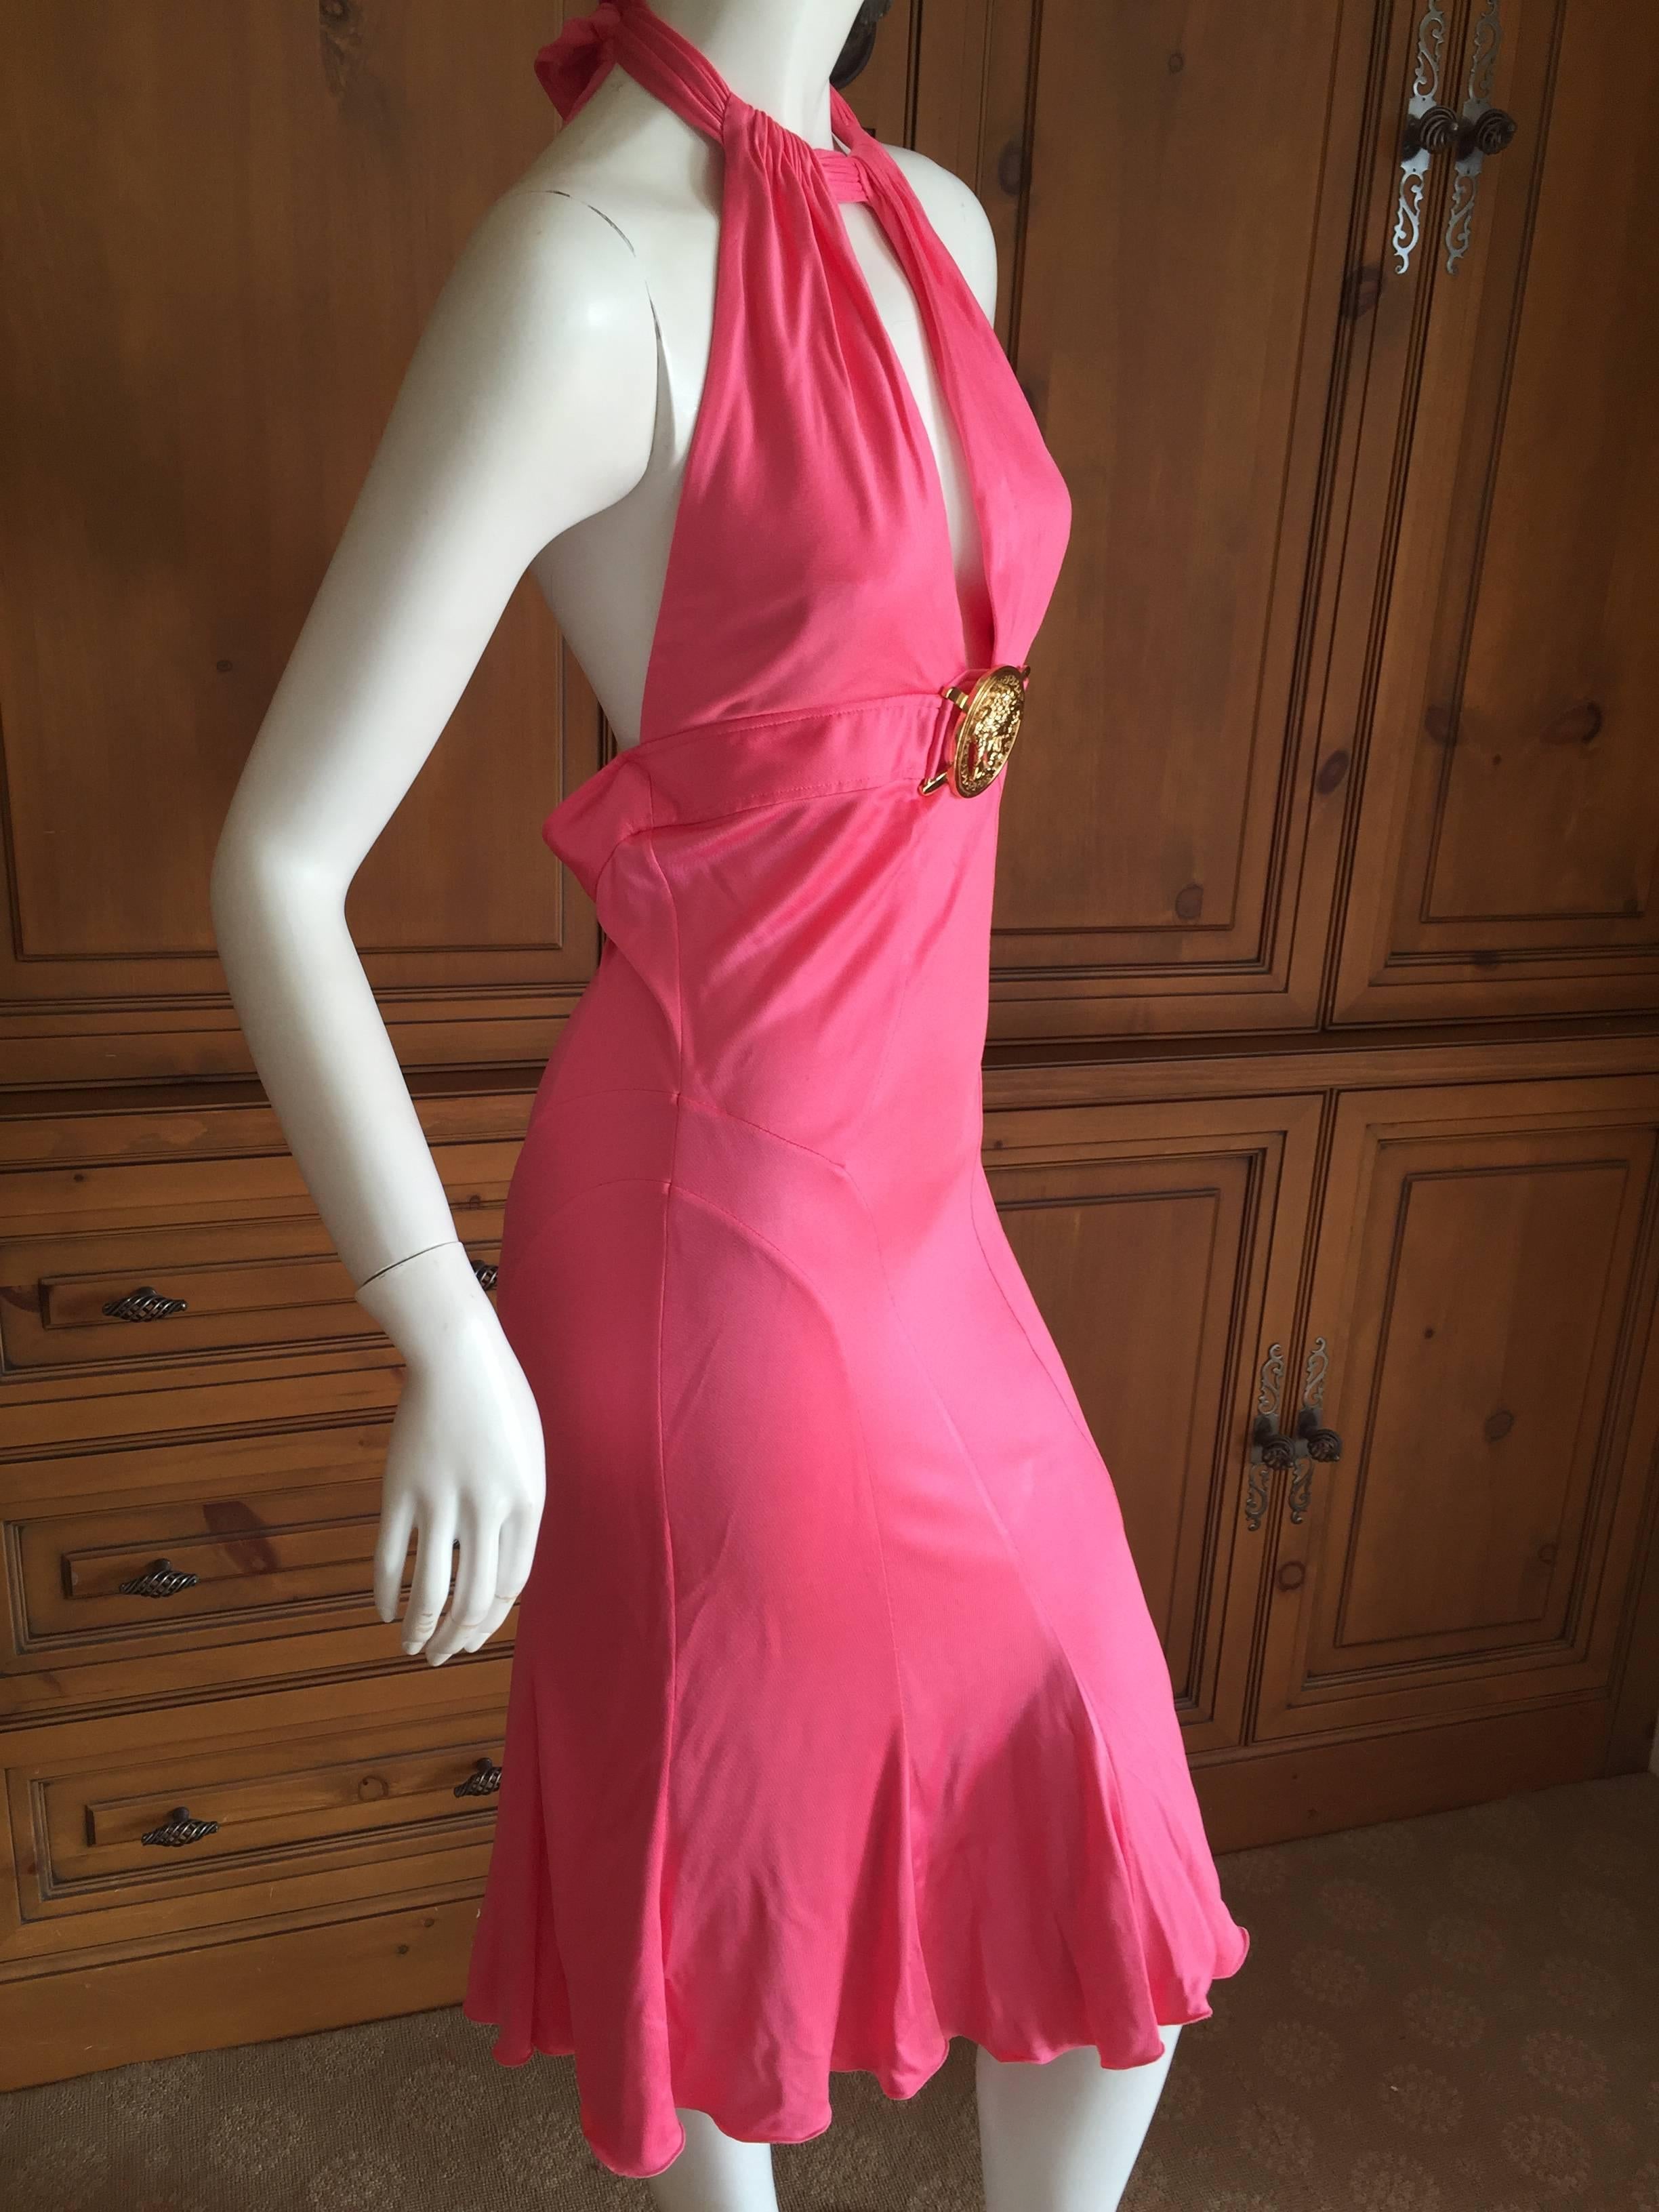 Women's Versace Backless Pink Cocktail Dress with Large Gold Medusa Buckle